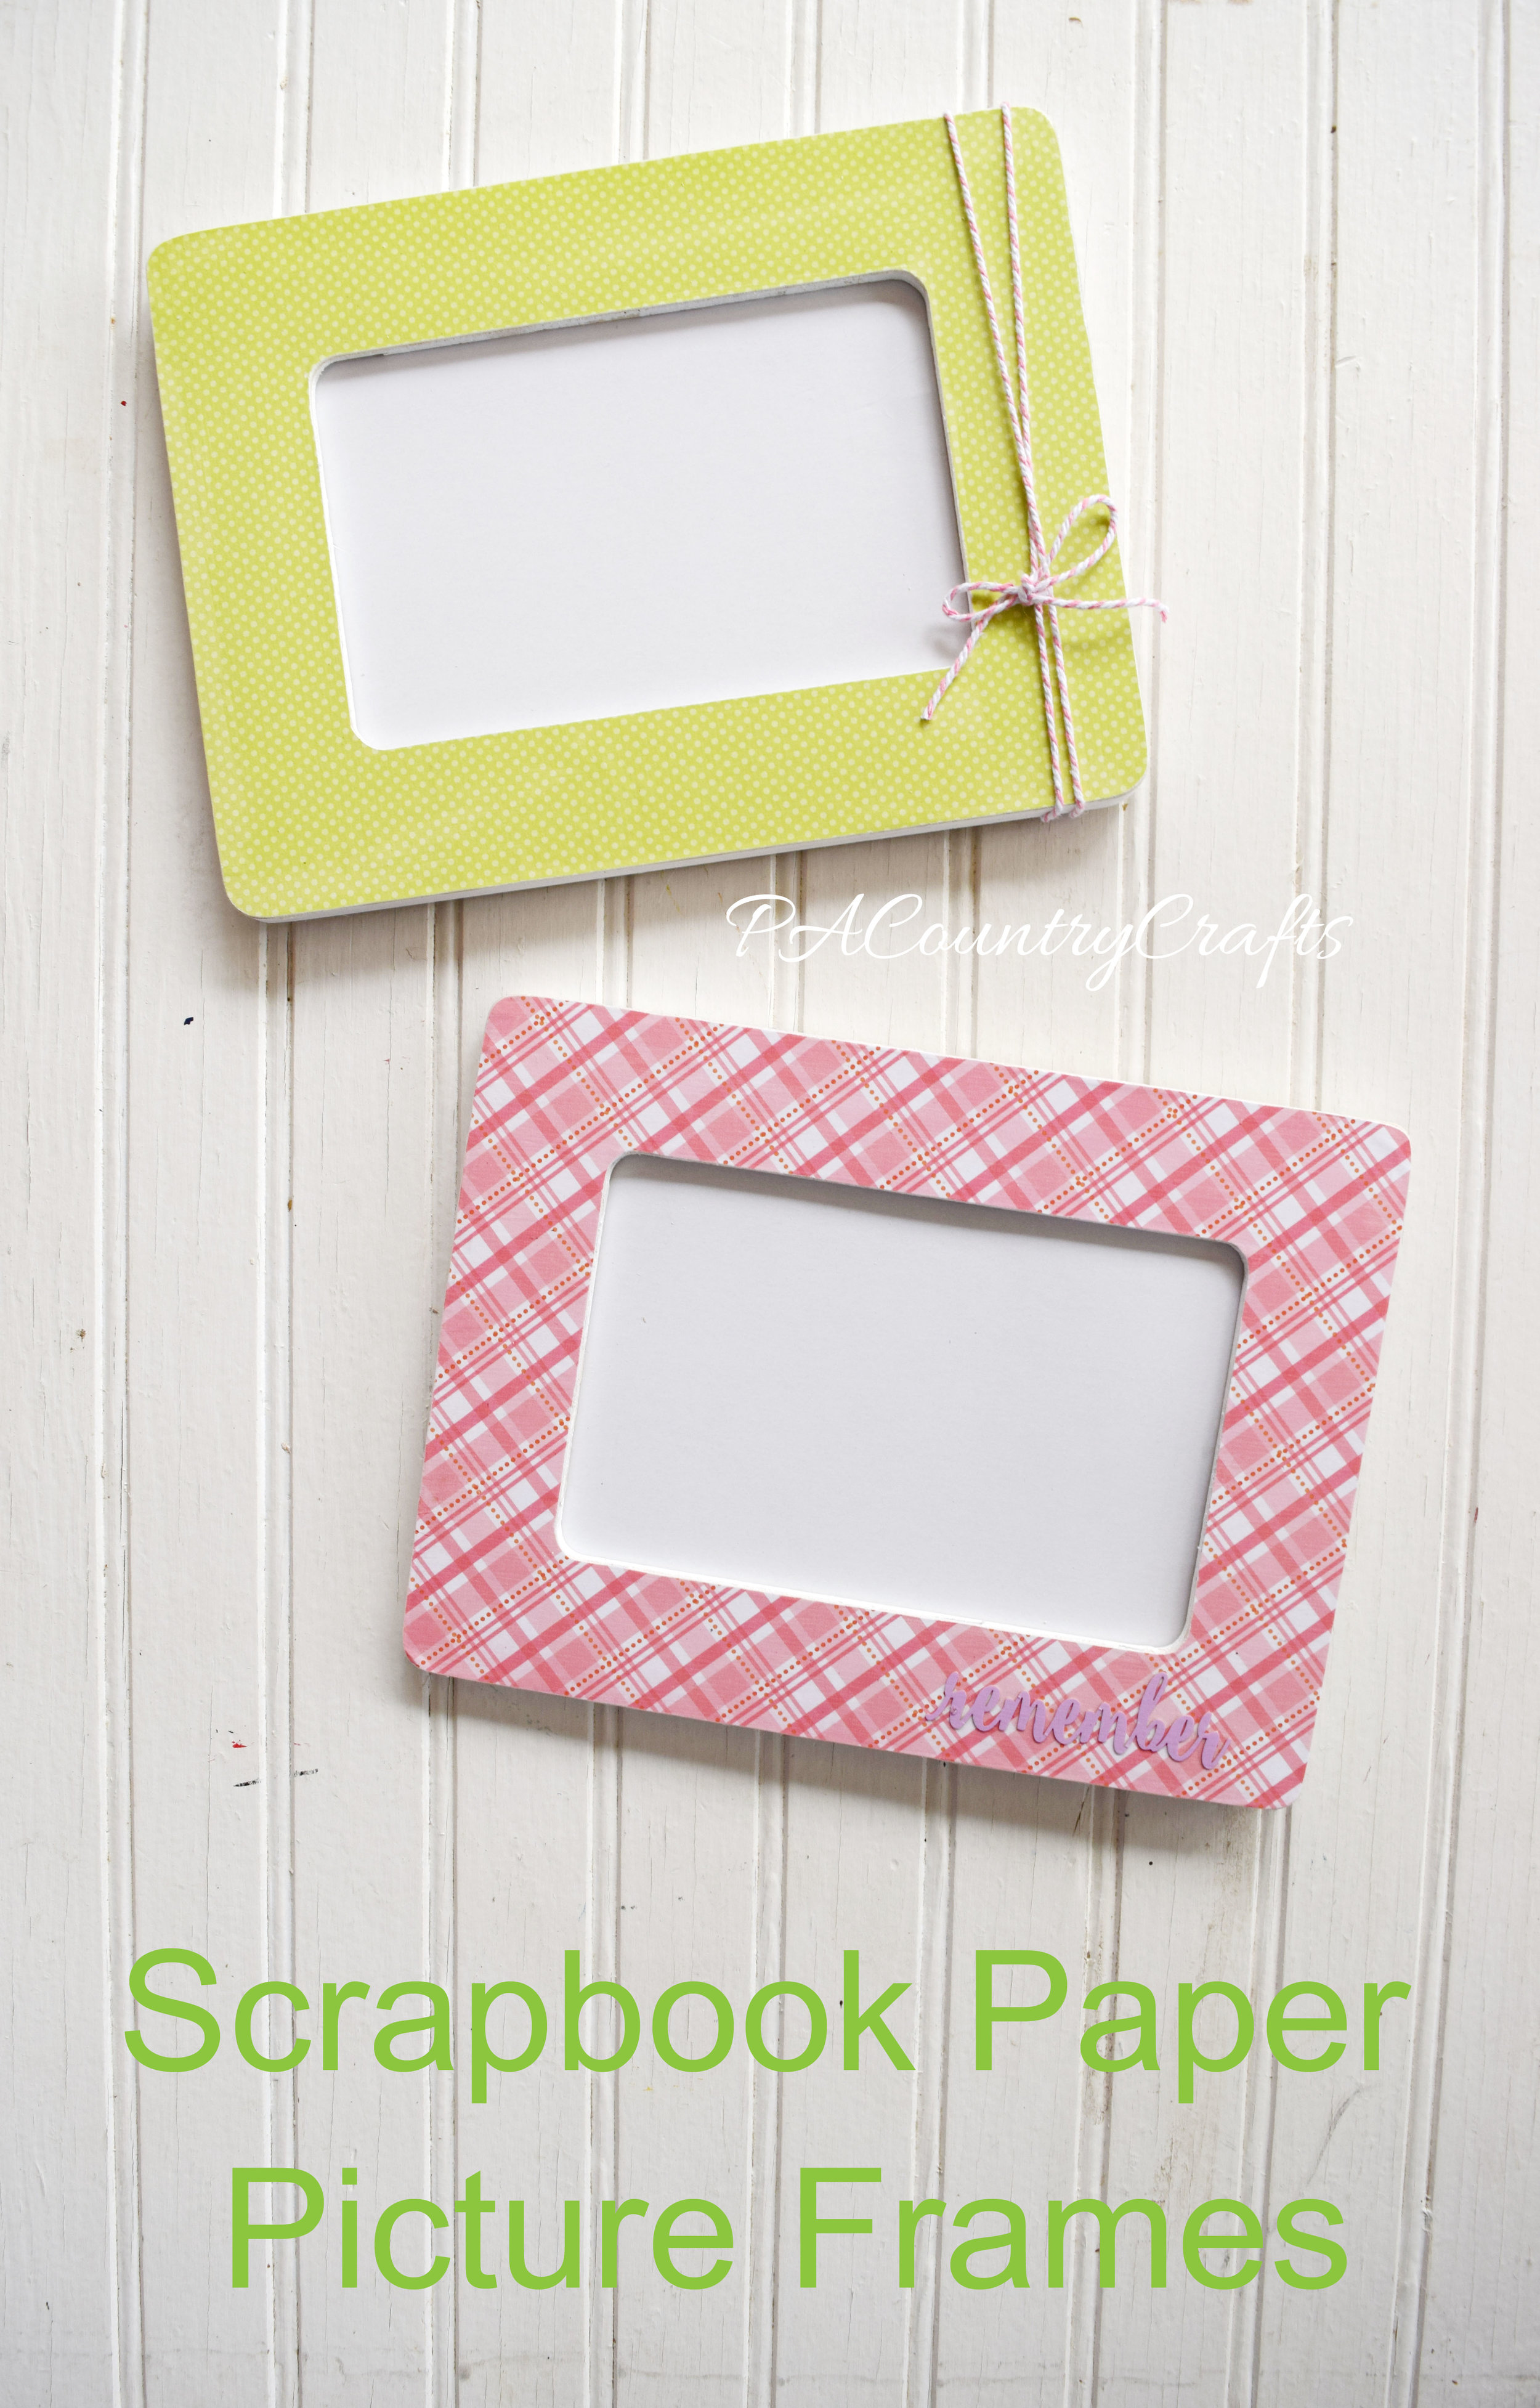 Use scrapbook paper and cheap wood frames to make a cute craft - perfect for craft nights and groups!